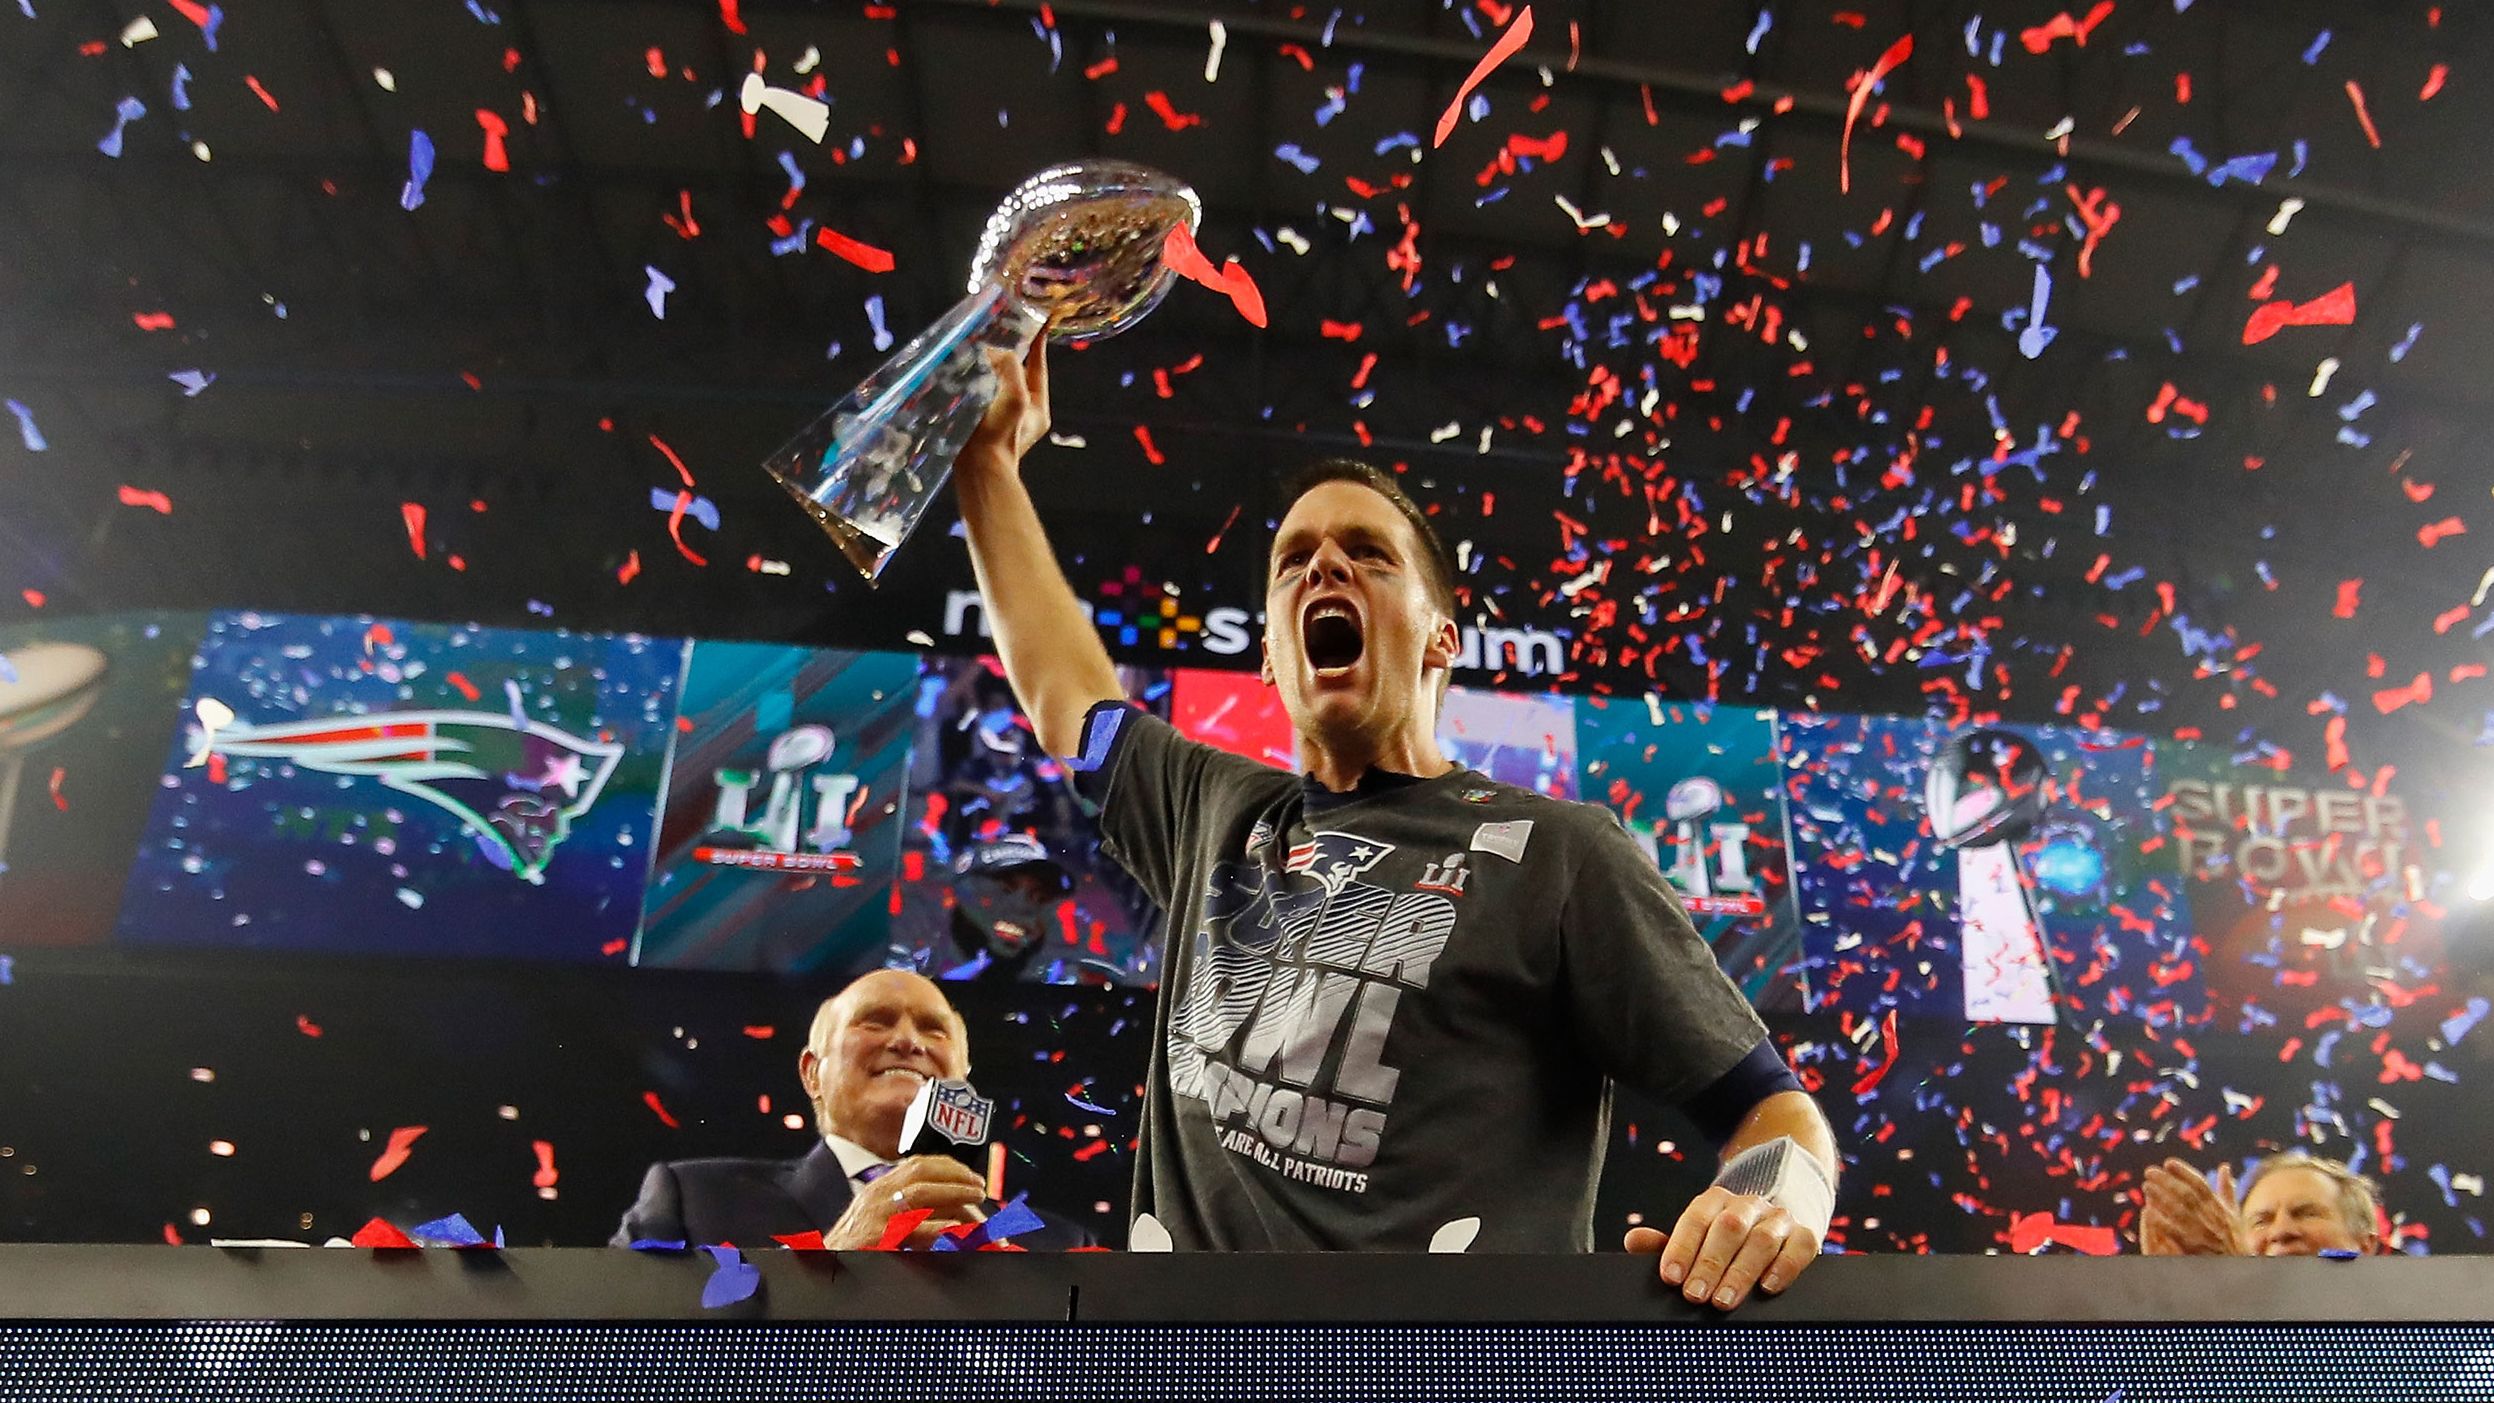 <strong>Super Bowl LI (2017):</strong> Tom Brady threw for a Super Bowl-record 466 yards as New England completed the biggest comeback in Super Bowl history. The Patriots trailed Atlanta 28-3 in the third quarter but rallied to win in overtime. It was Brady's fourth MVP award.